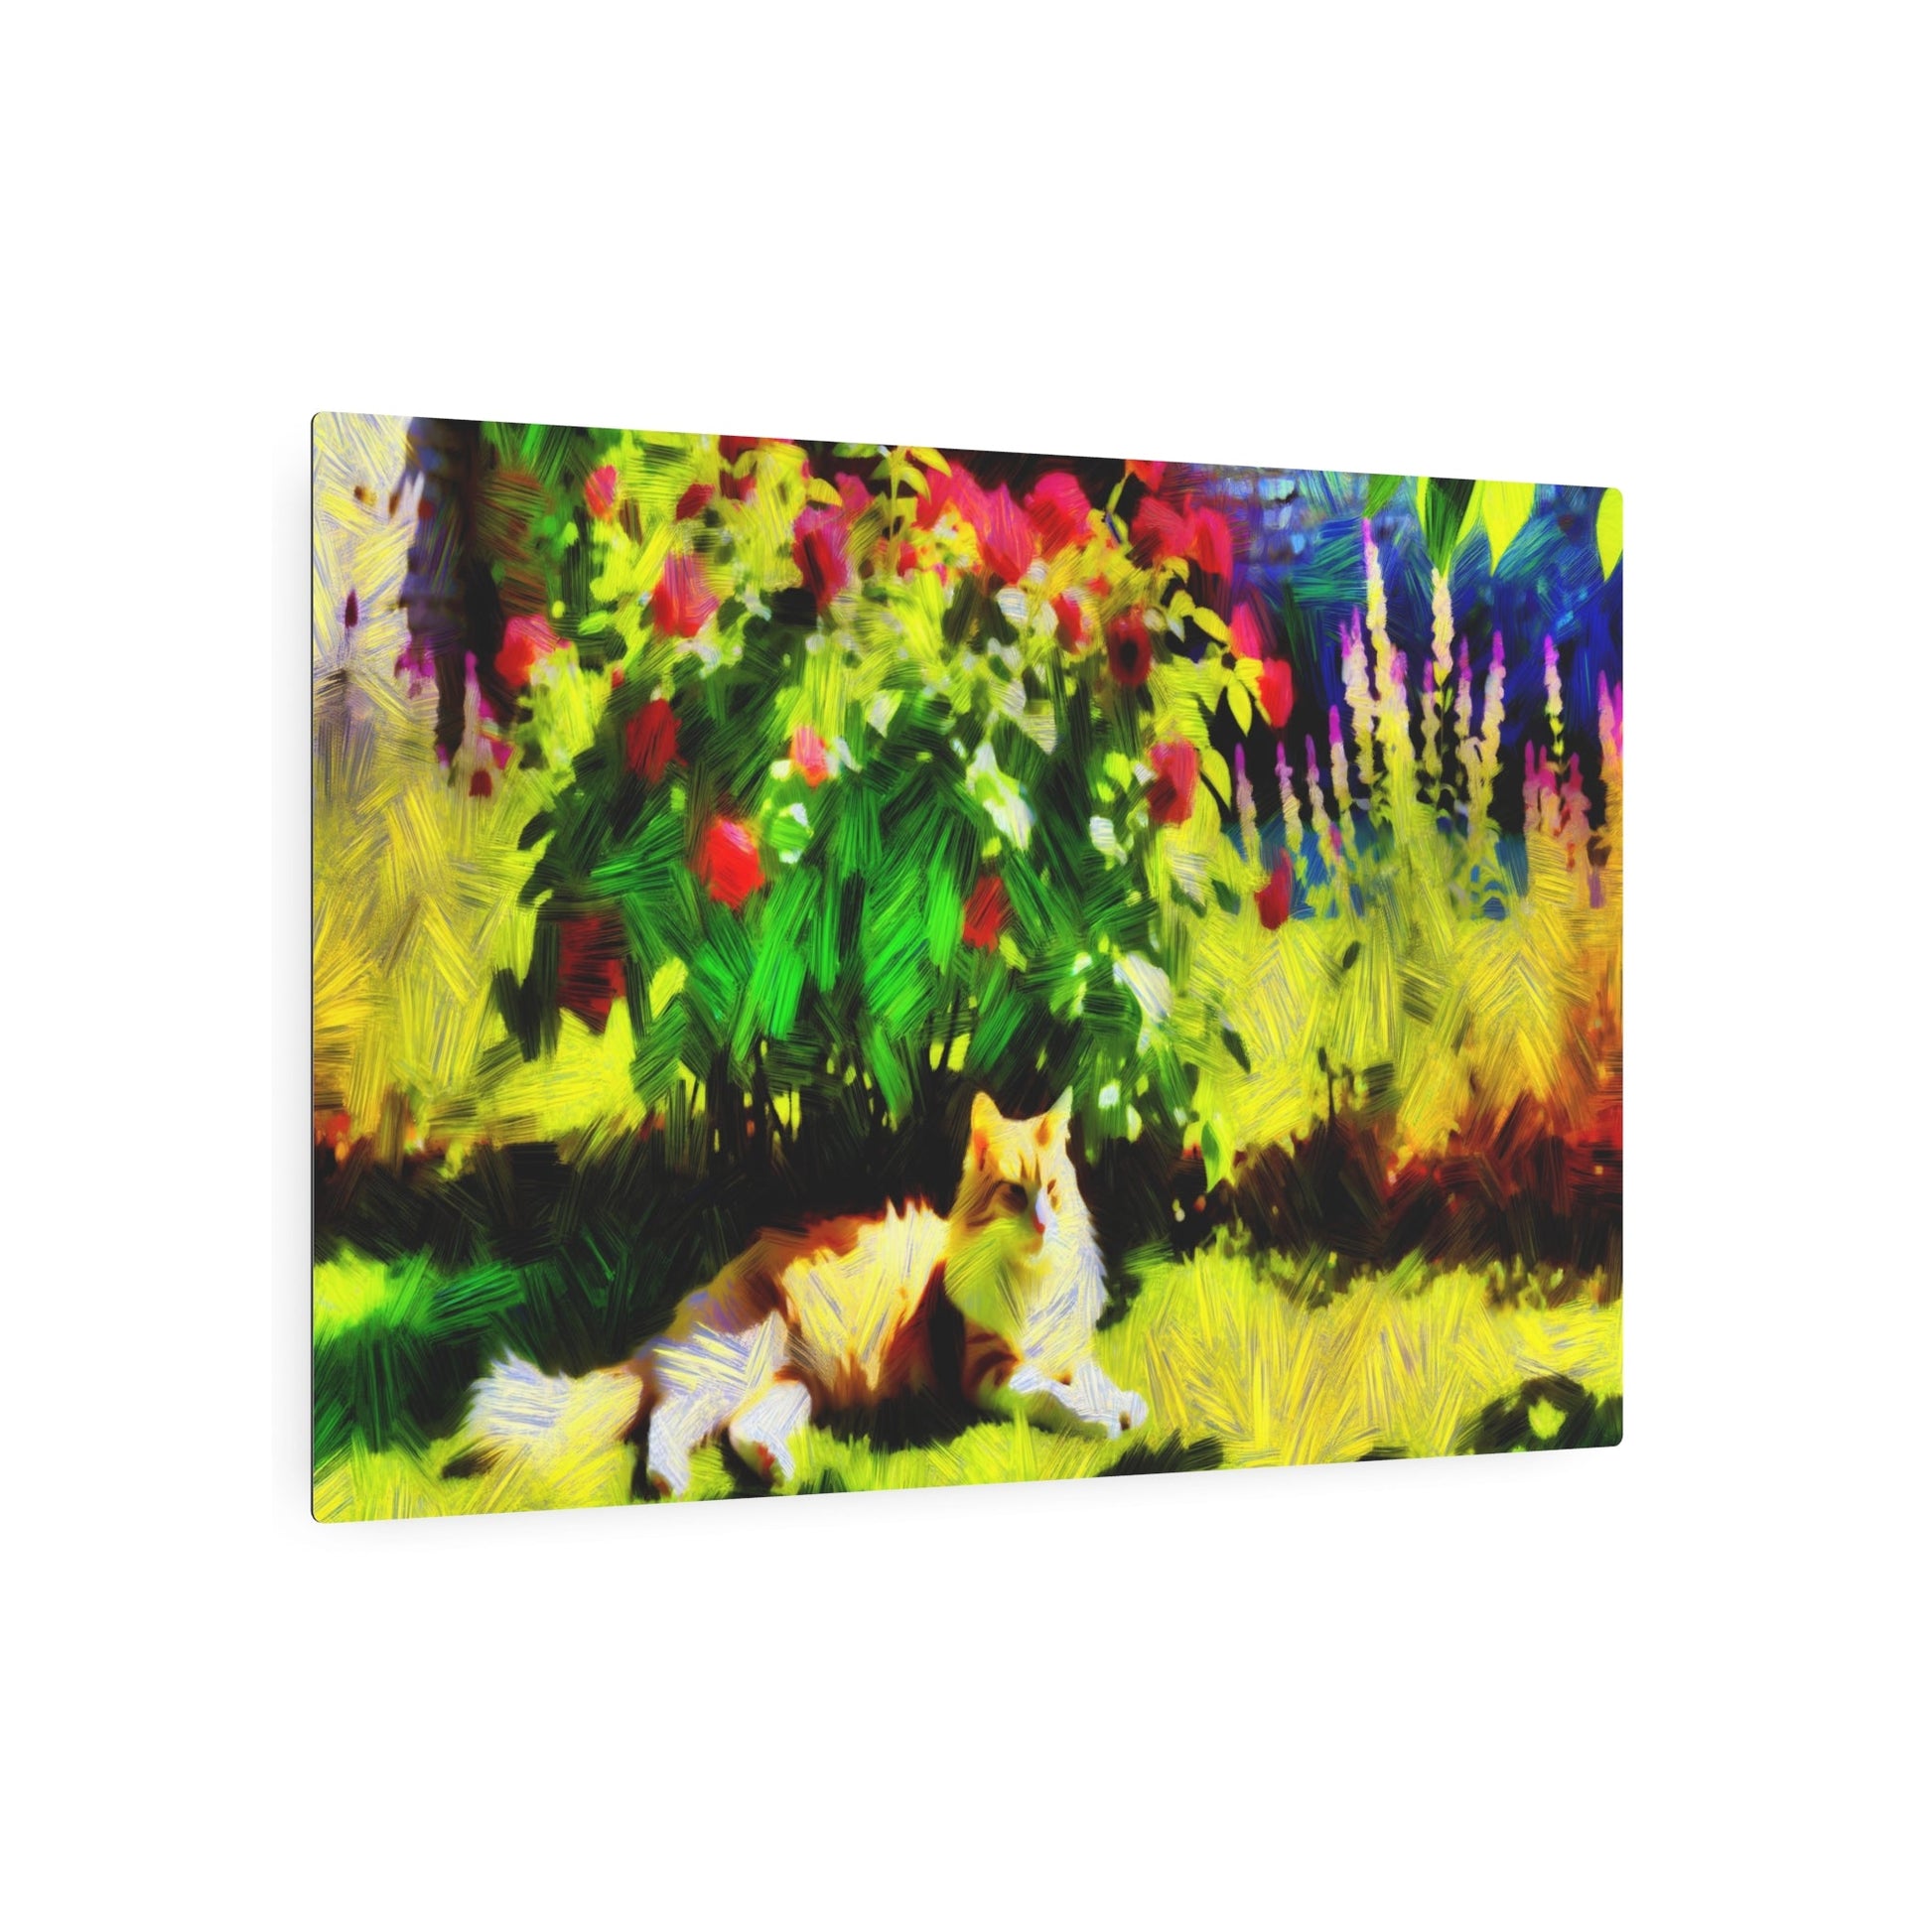 Metal Poster Art | "Impressionist Style Western Art - Sunlit Garden Scene with Cat amid Blooming Flowers" - Metal Poster Art 36″ x 24″ (Horizontal) 0.12''